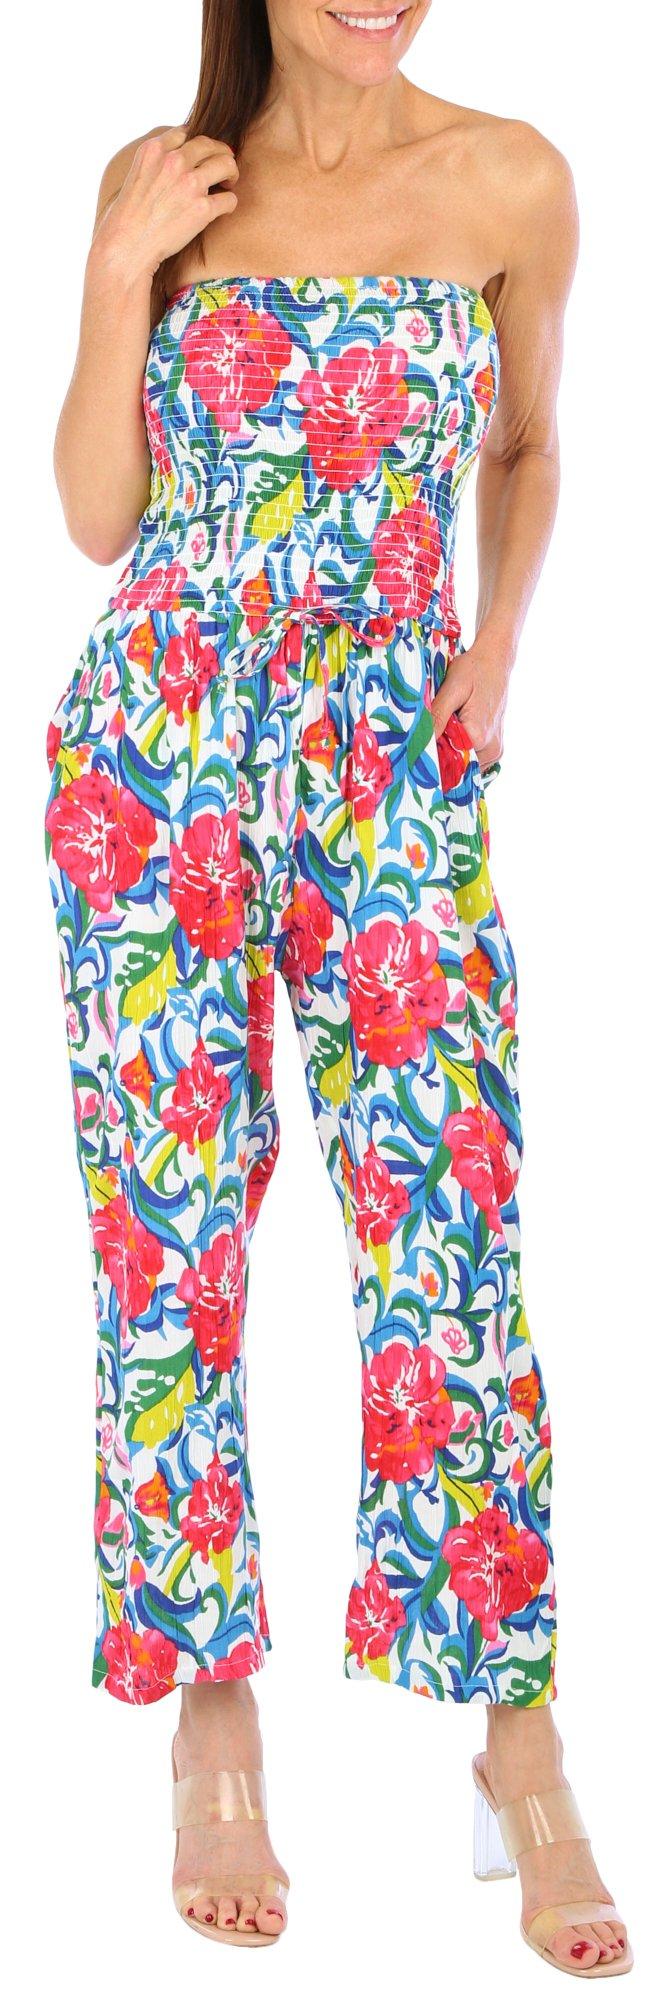 Womens Floral Tube Top Jumpsuit